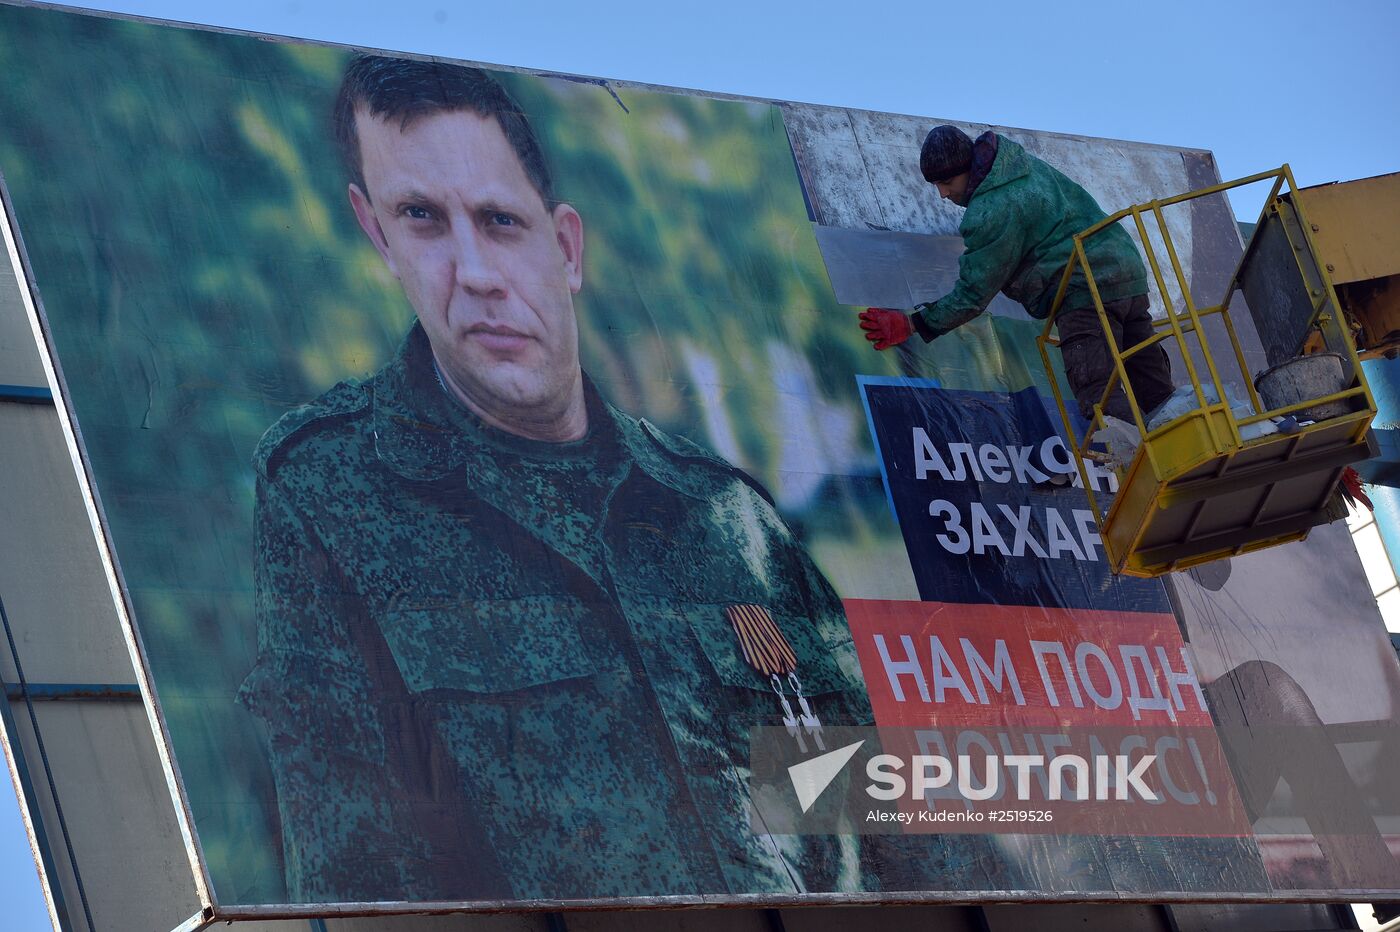 Donetsk ahead of republic's Head and People's Council elections